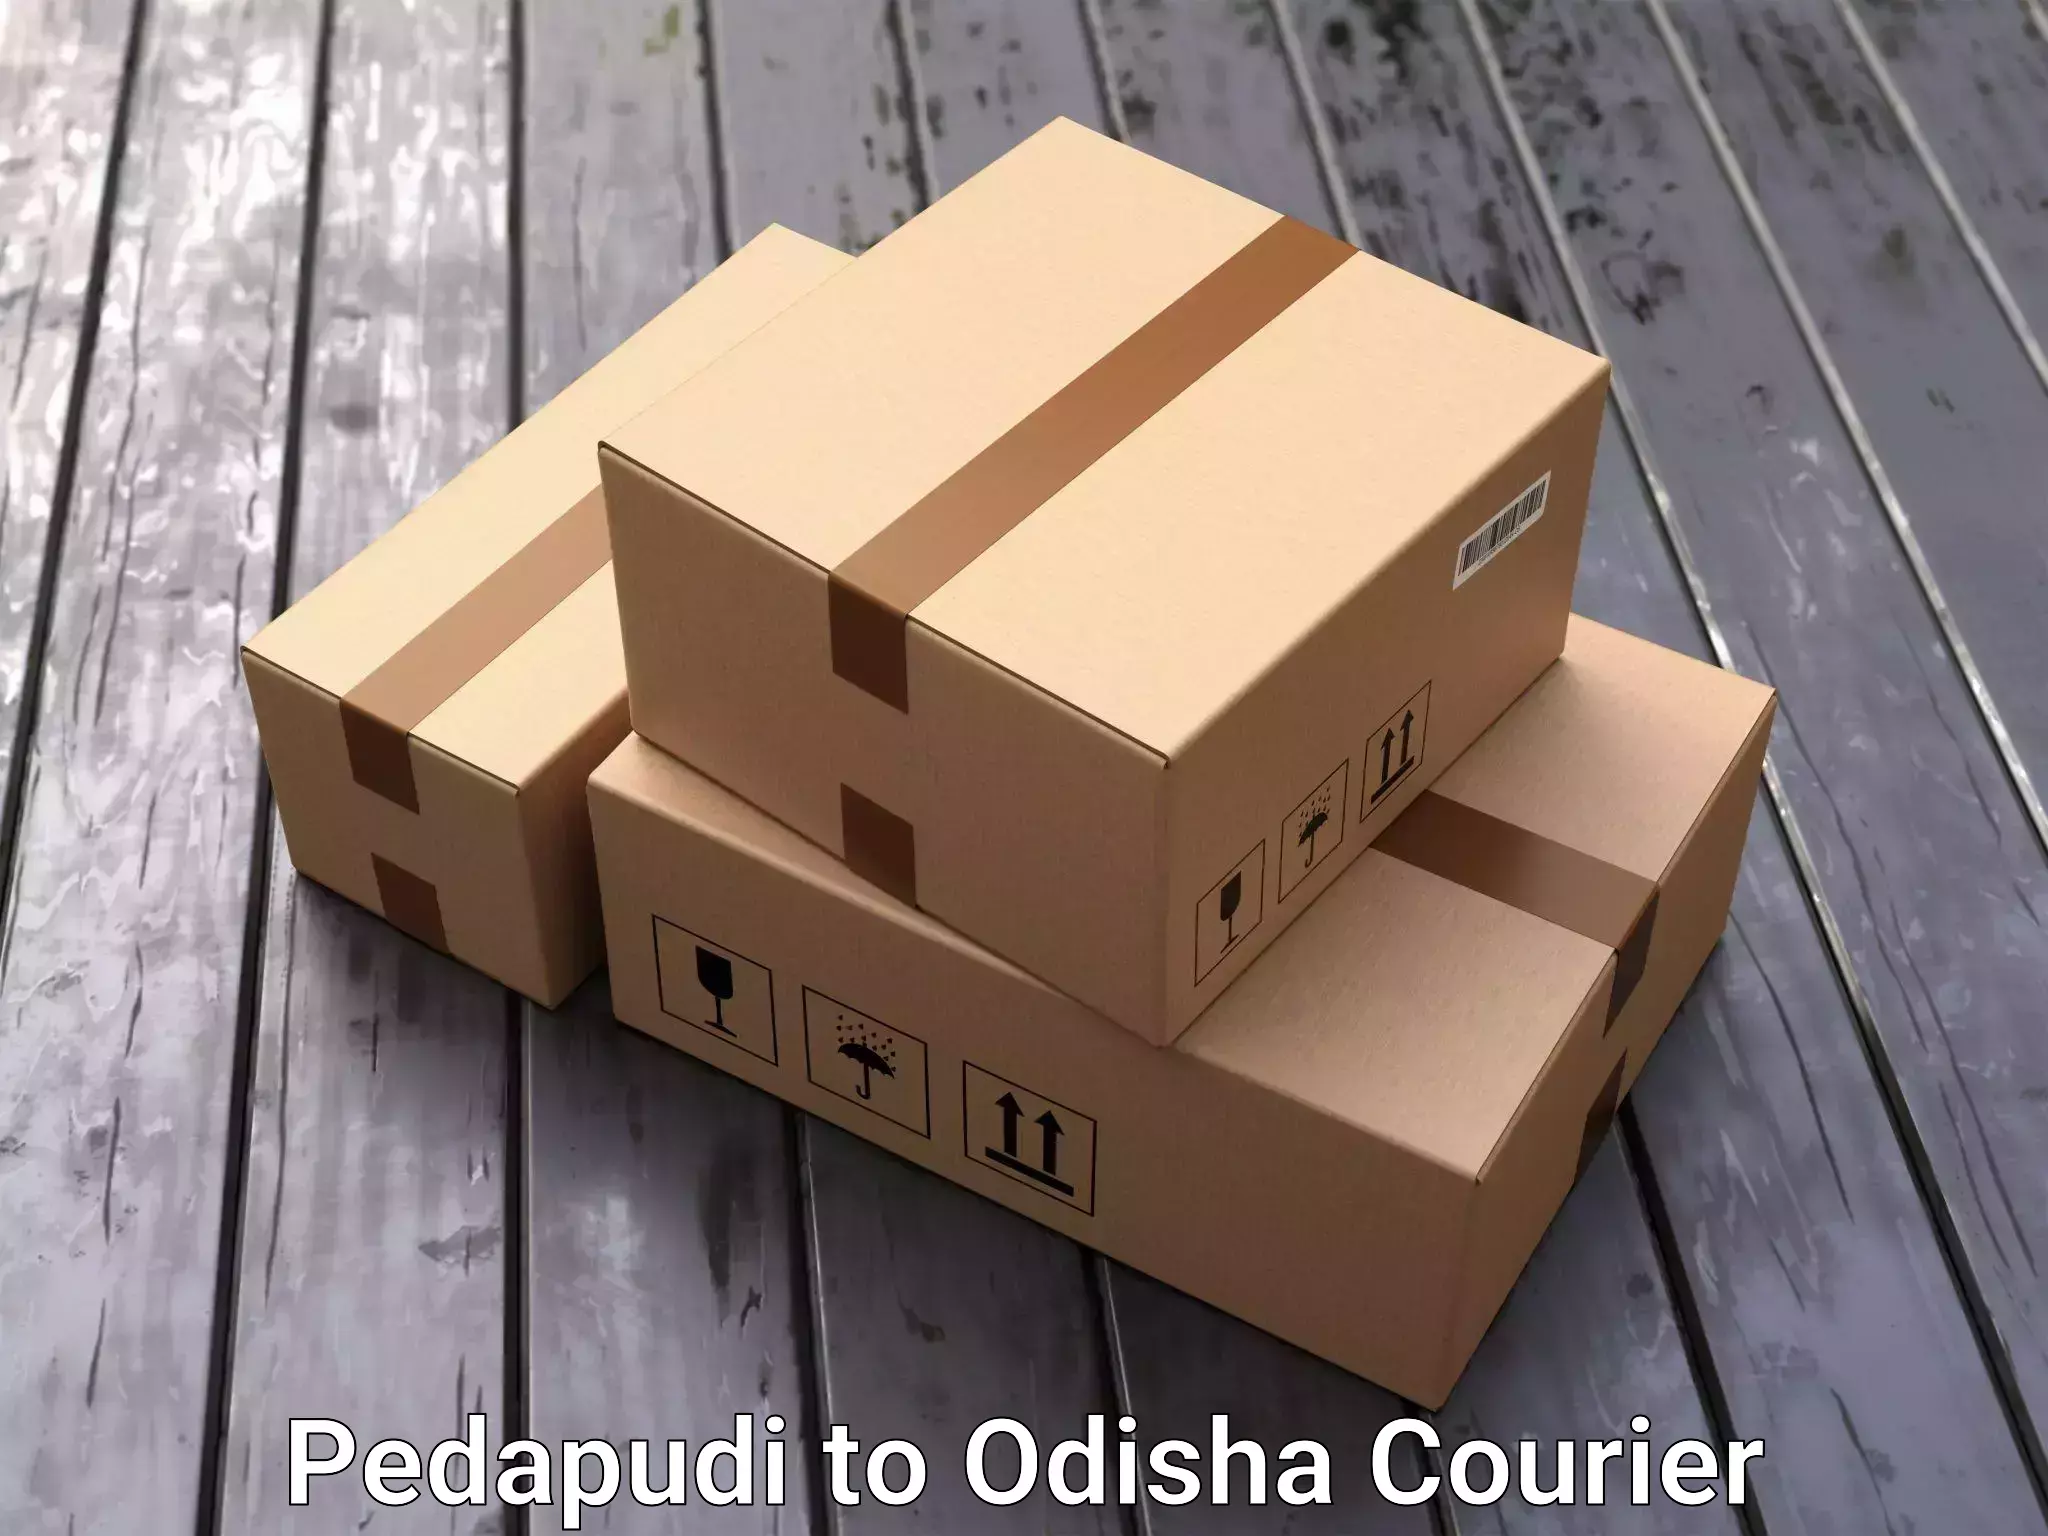 Trusted relocation experts Pedapudi to Polasara